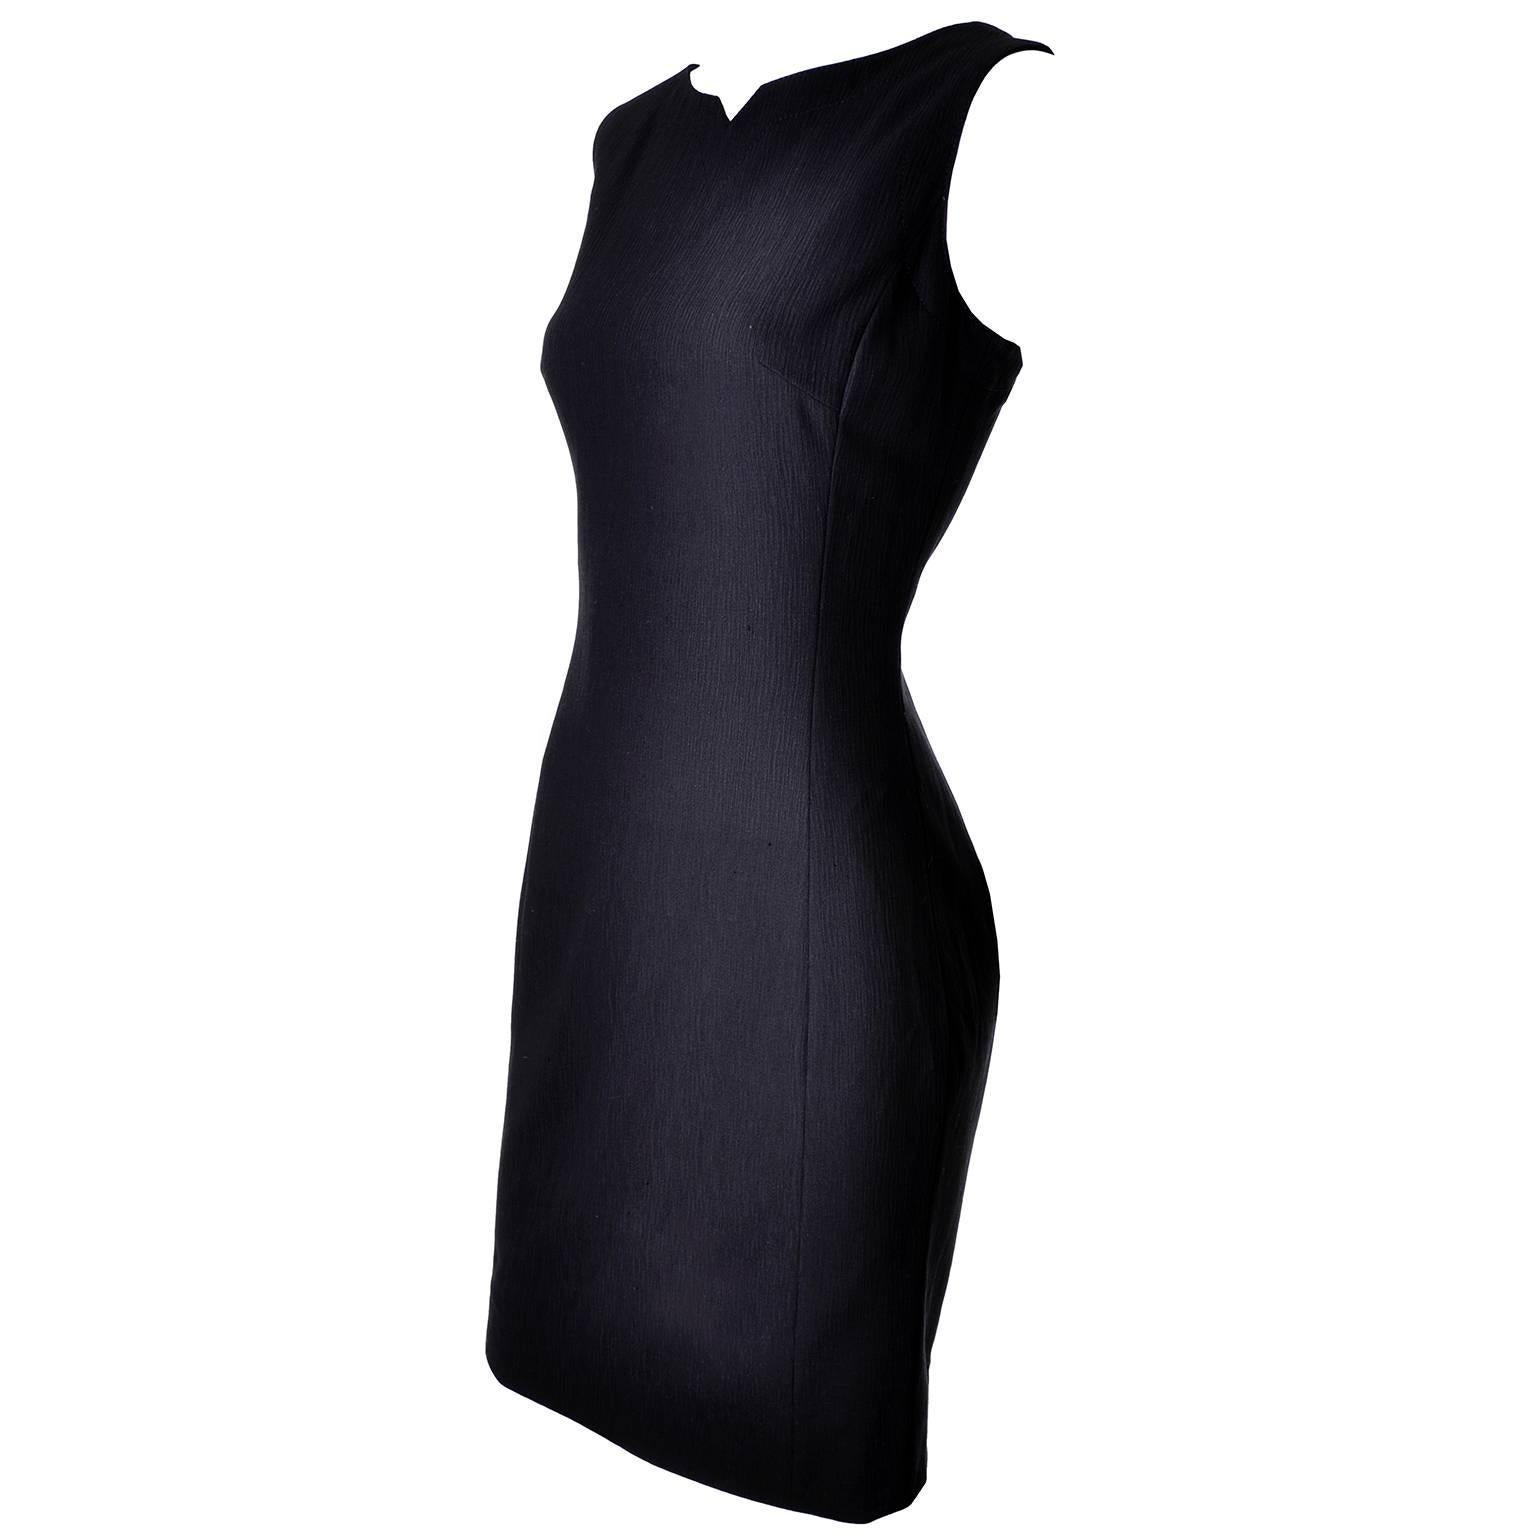 This beautiful dress suit includes a sleeveless black Escada dress and a matching jacket. The slim fitting dress has a notched neckline and zips up the back. The blazer has subtle shoulder pads and logo marked buttons up the front and on the cuffs.